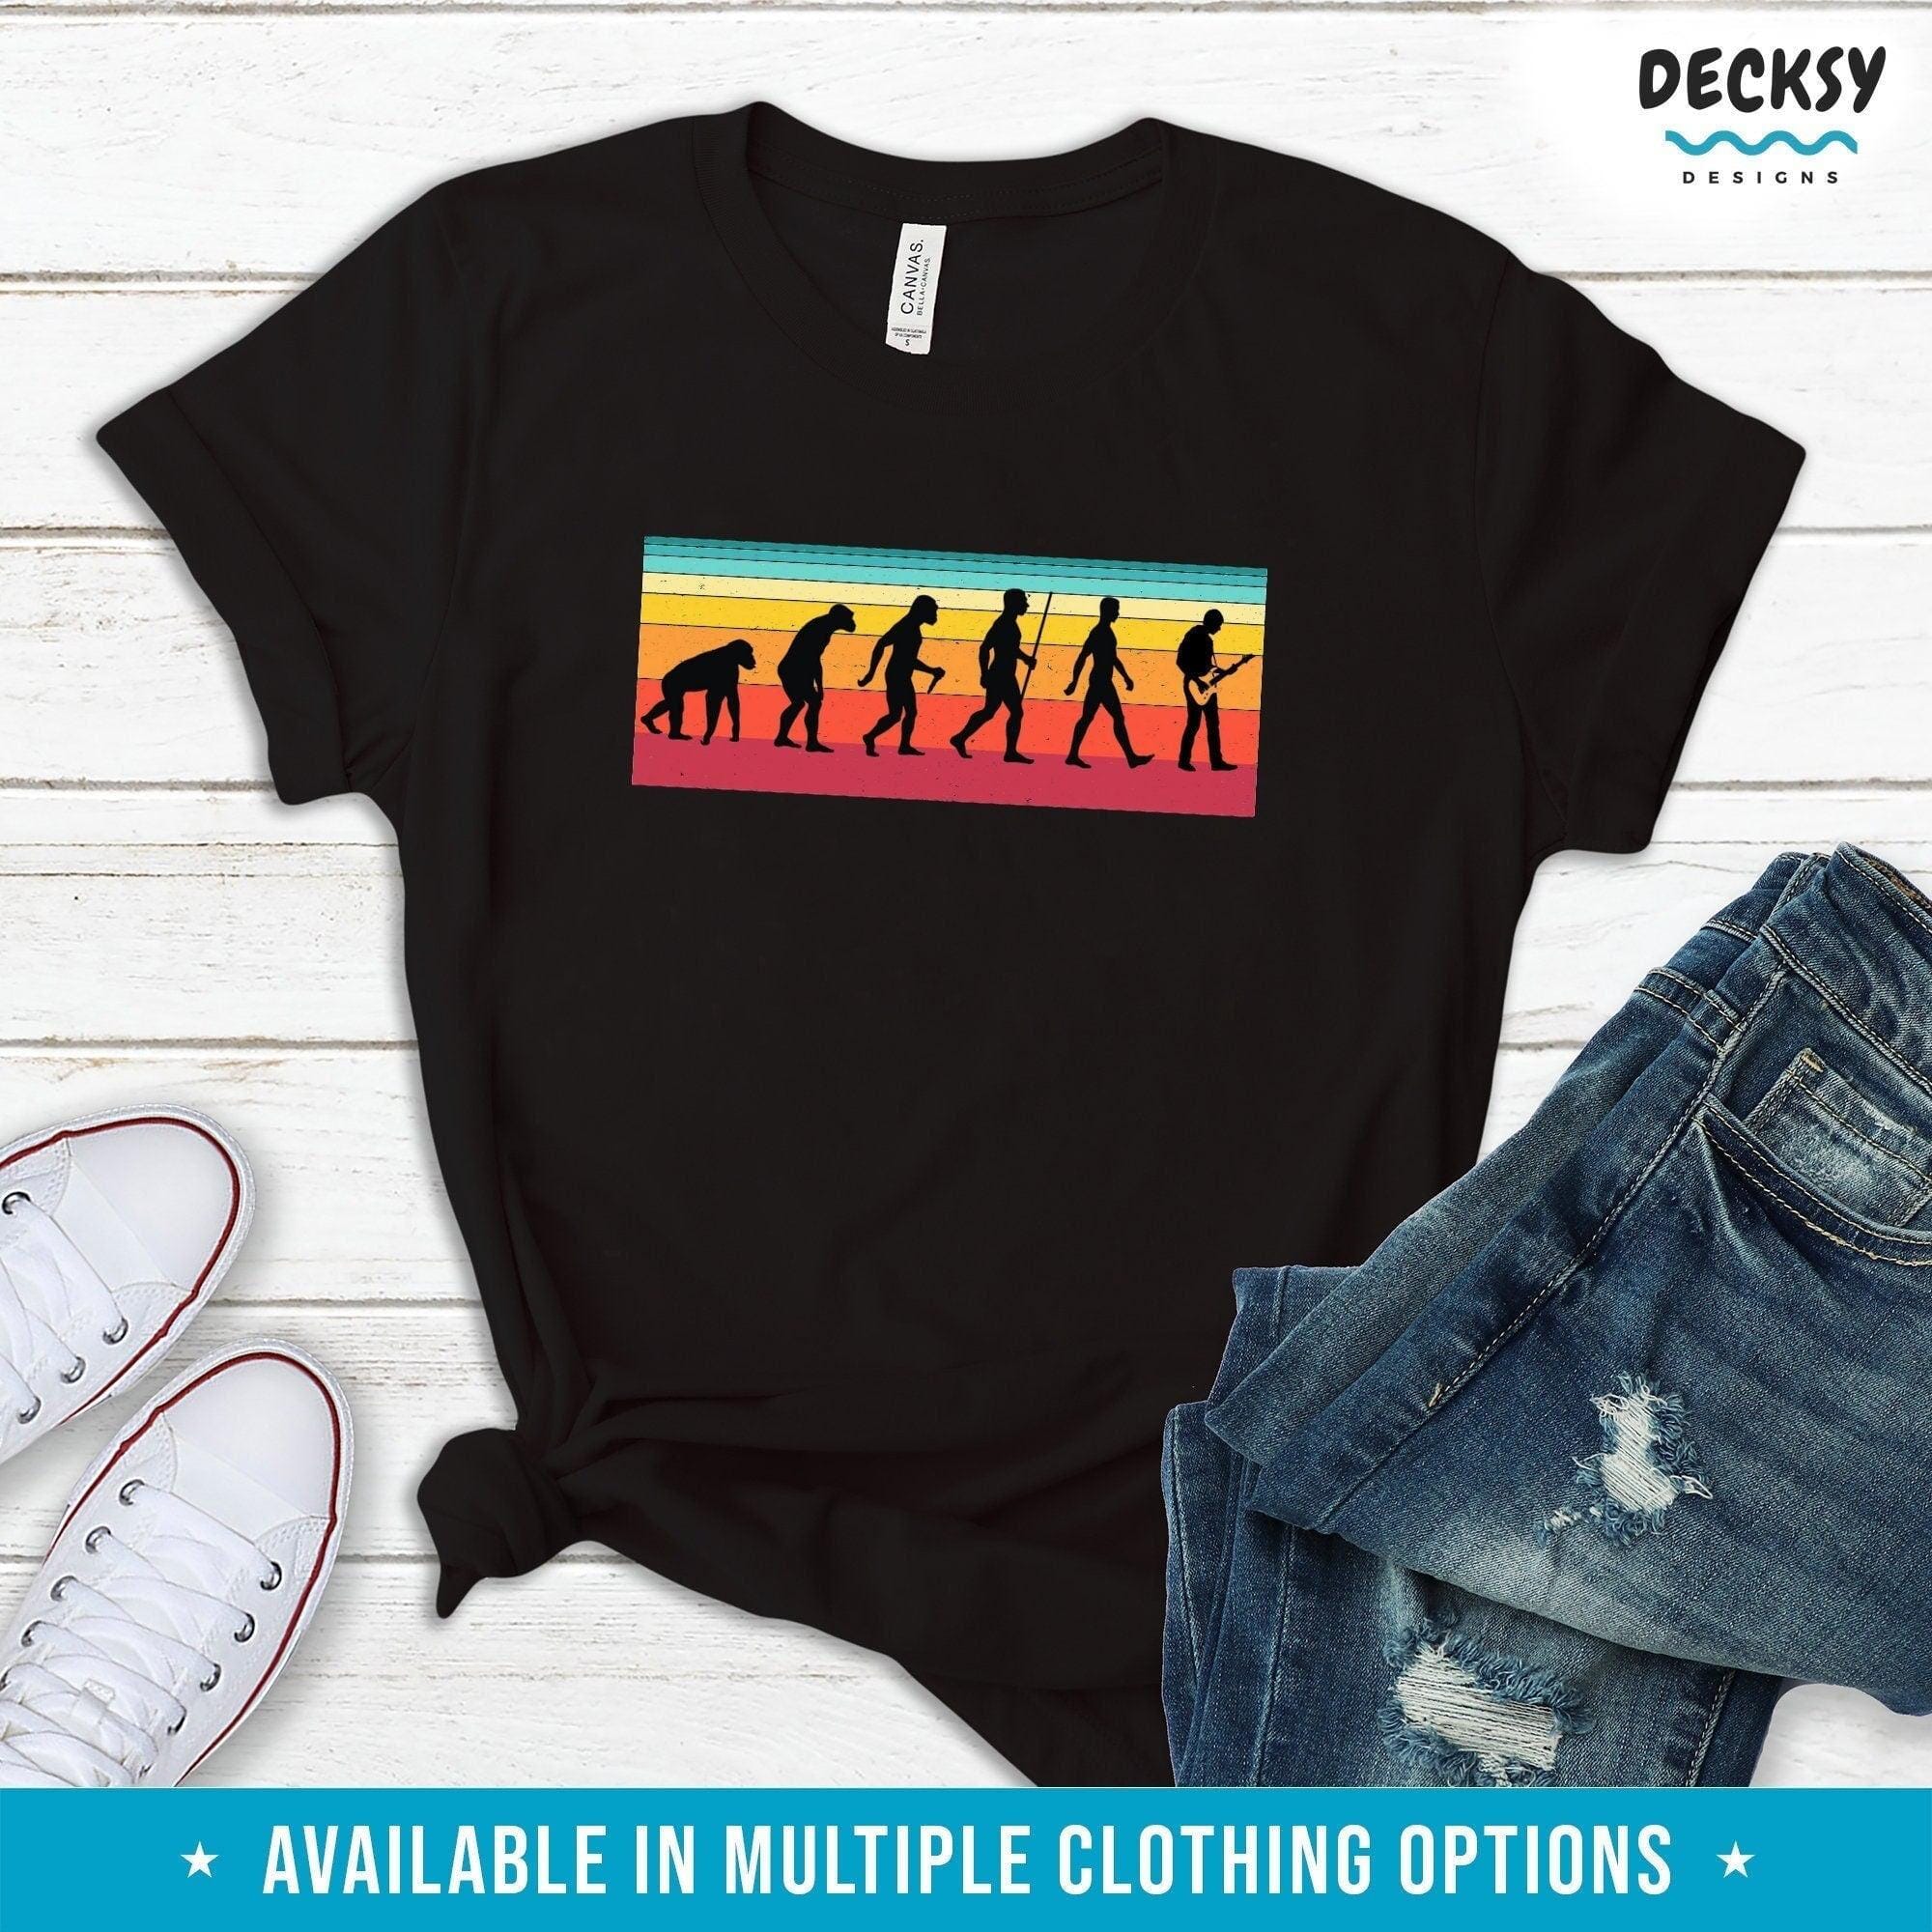 Guitar Player Shirt, Gift For Guitarist-Clothing:Gender-Neutral Adult Clothing:Tops & Tees:T-shirts:Graphic Tees-DecksyDesigns